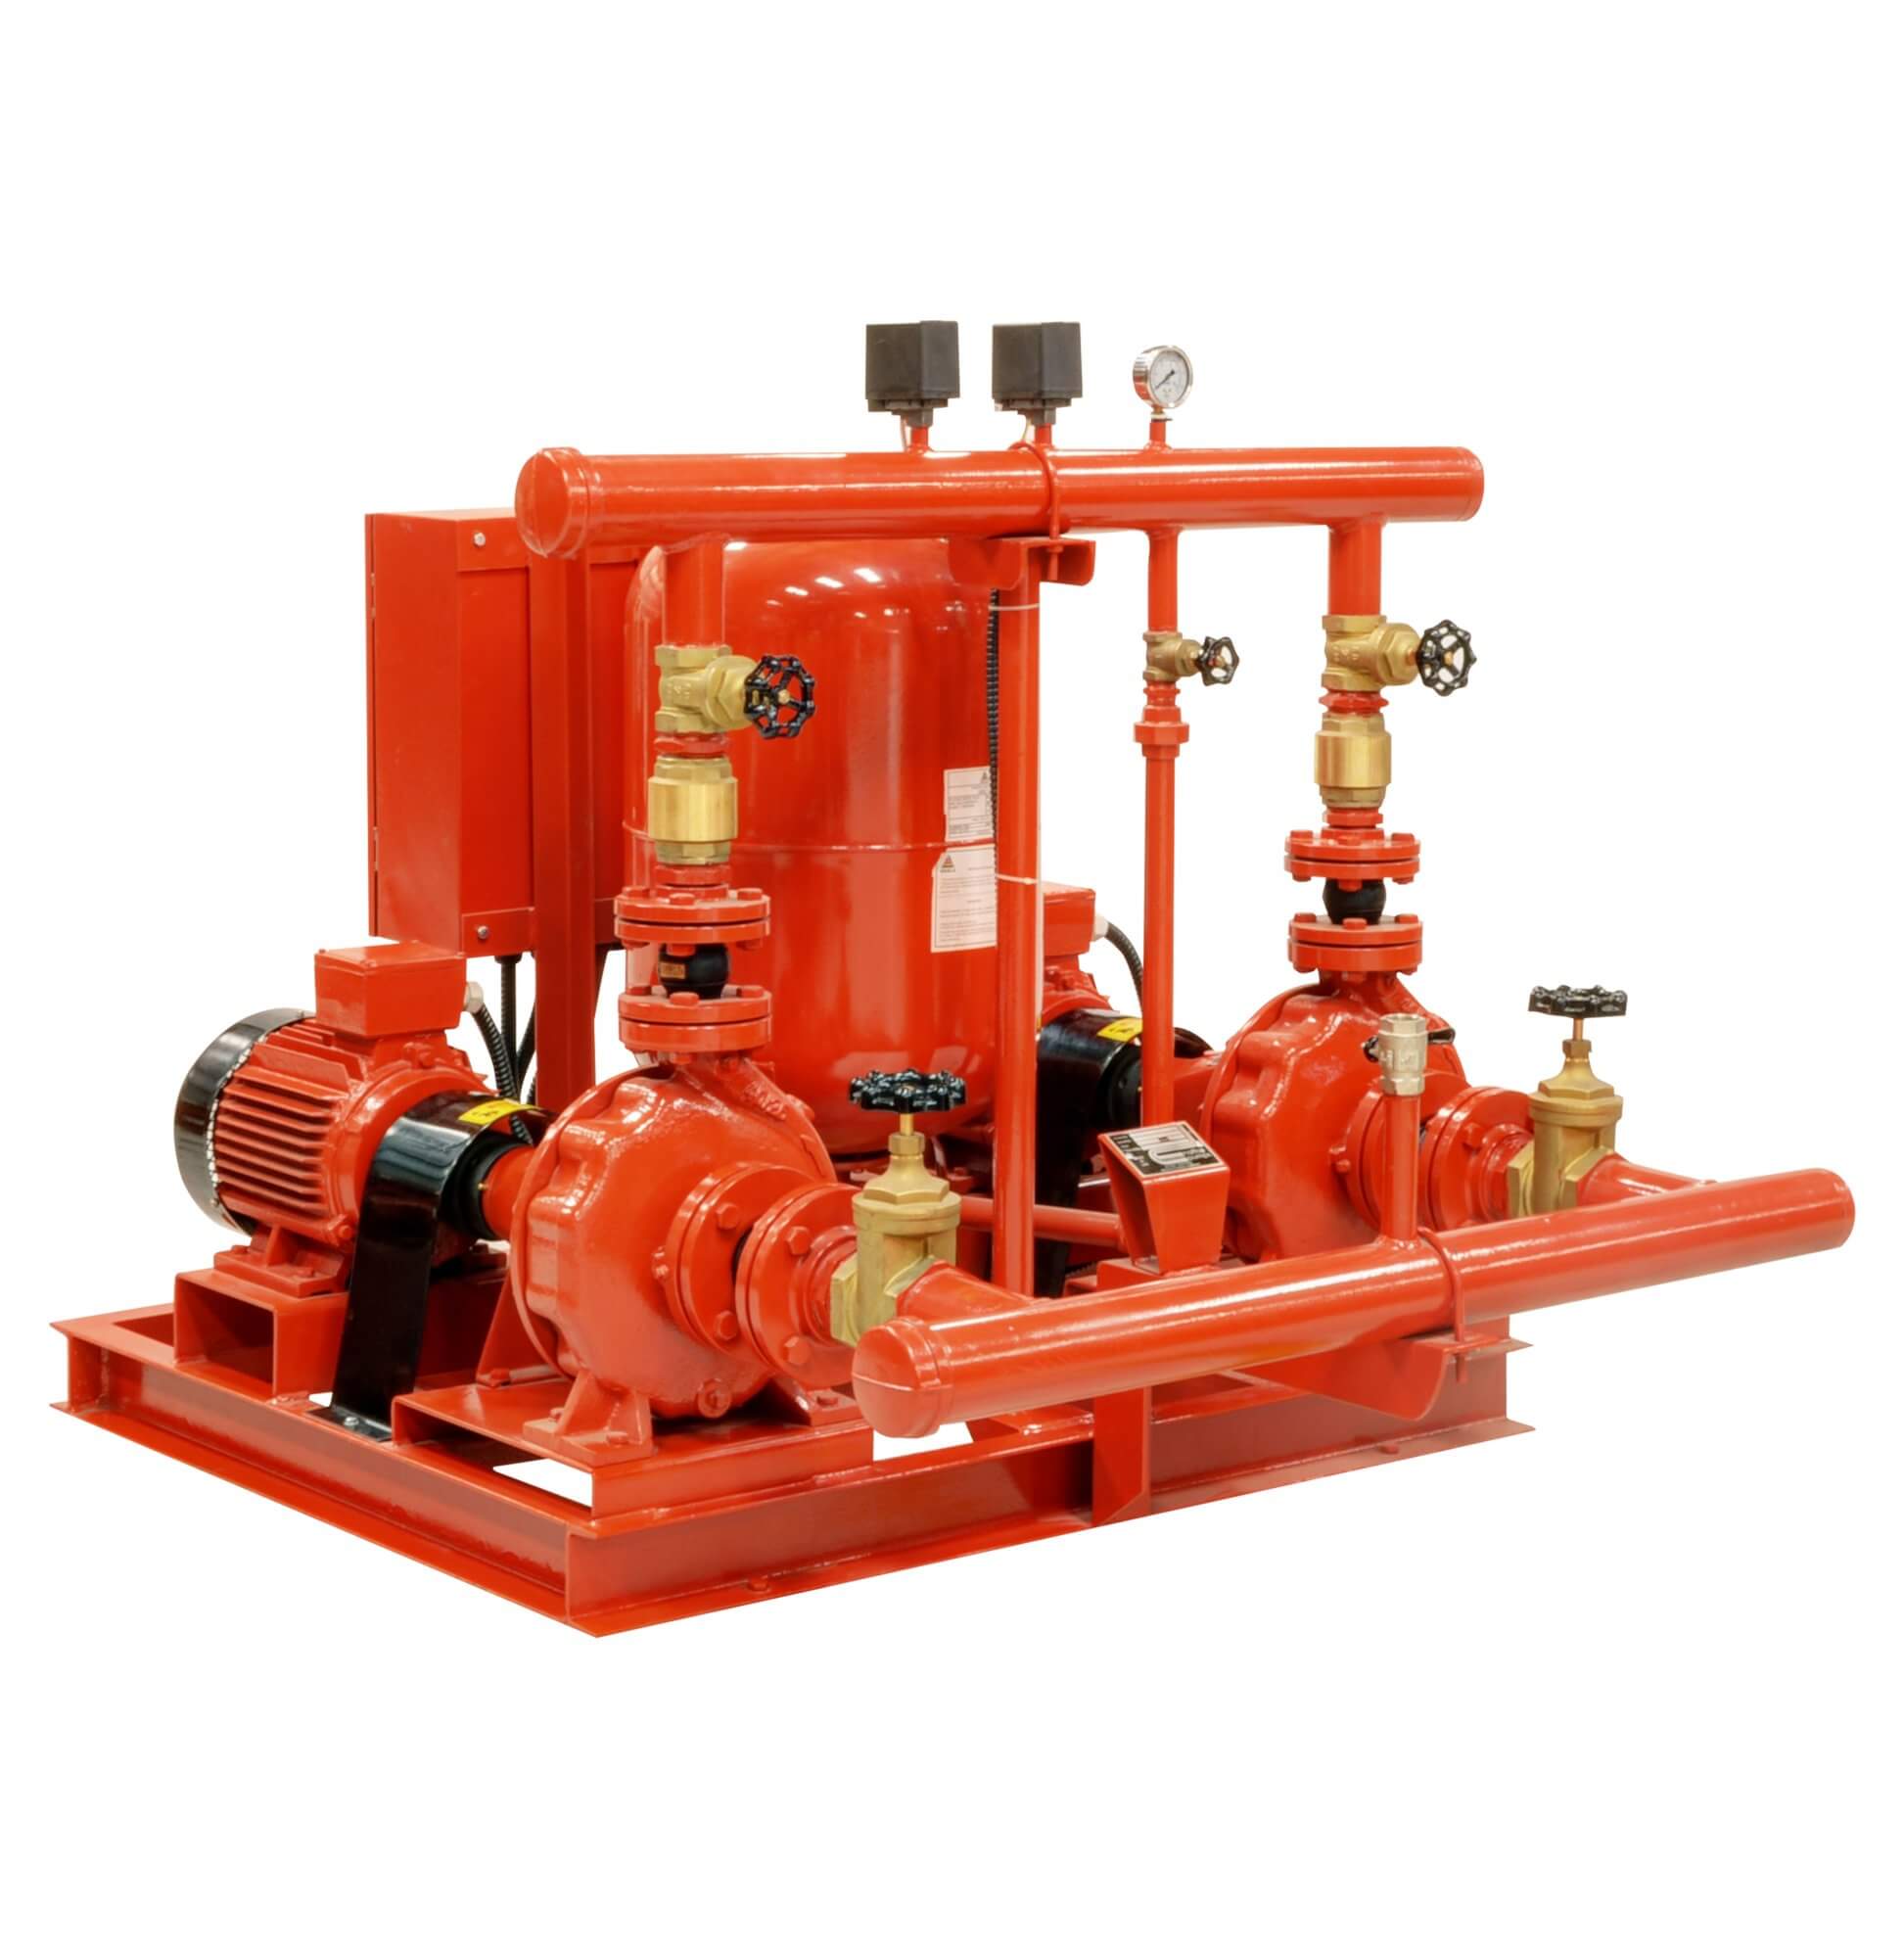 Fire pump from naffco for a page from stevok.ae that shows they are fire pump suppliers in Dubai